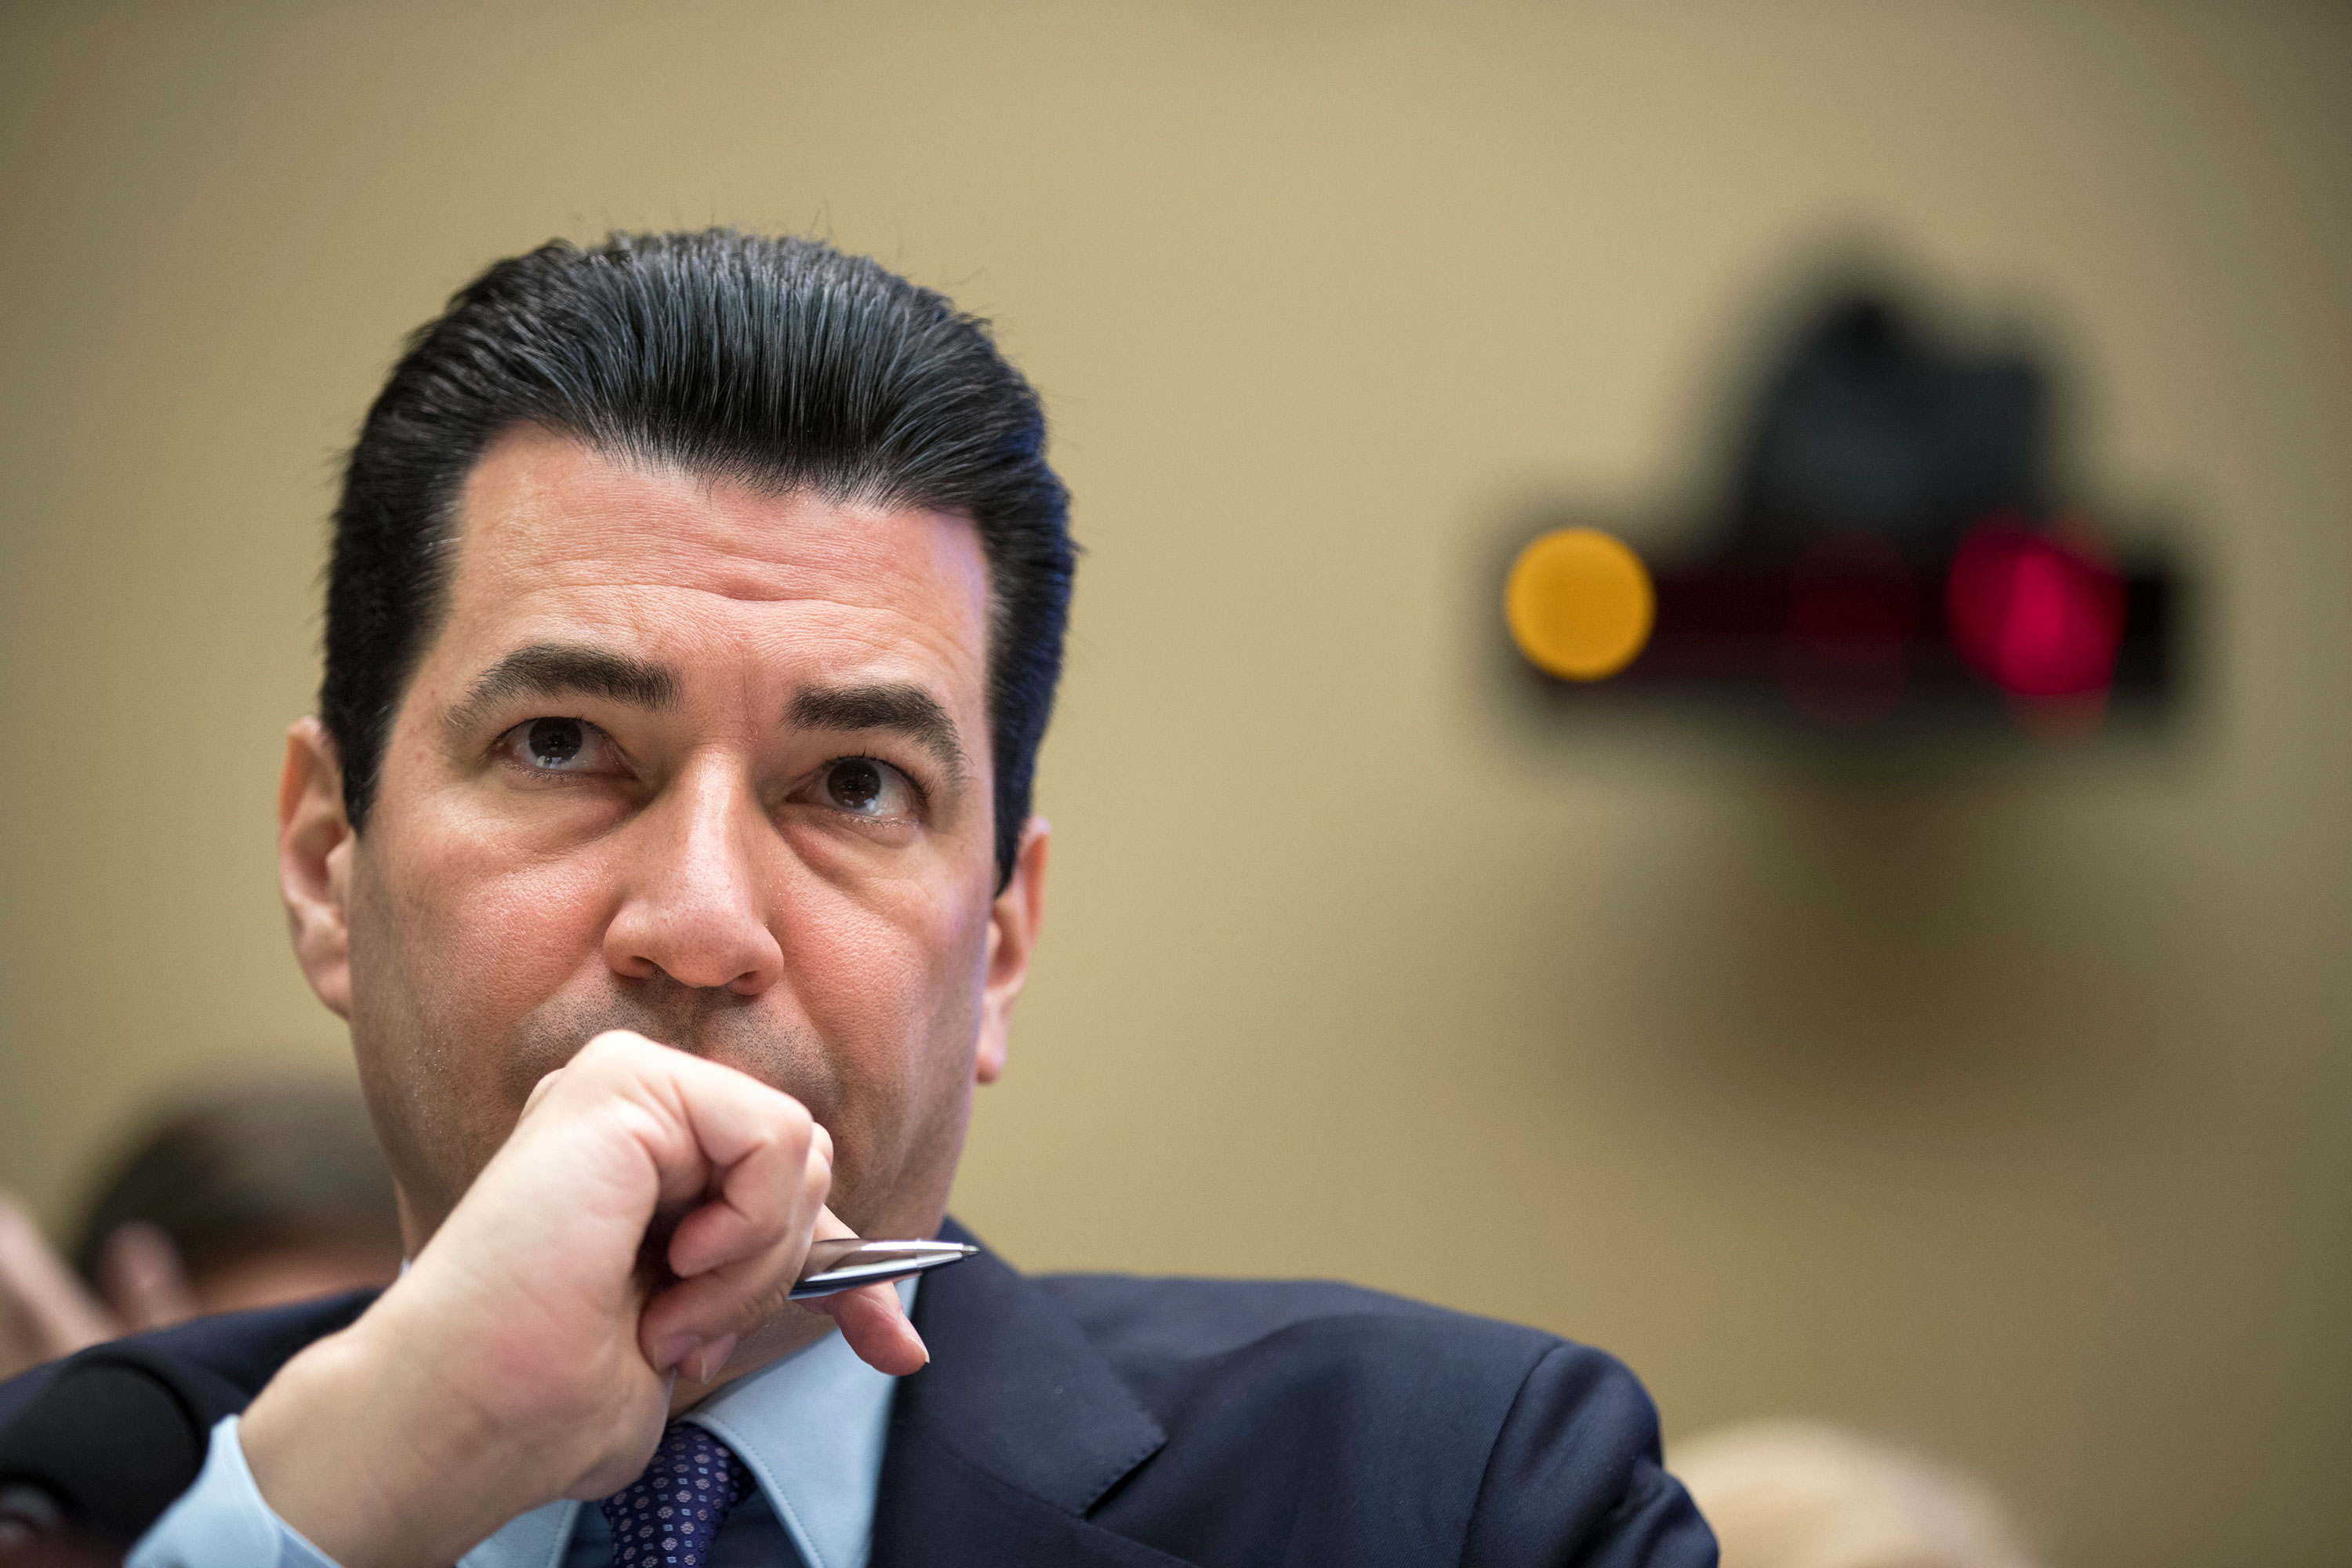 Dr. Scott Gottlieb, former commissioner of the US Food and Drug Administration, testifies during a House Energy and Commerce Committee hearing in Washington, D.C. in this 2017 file photo.